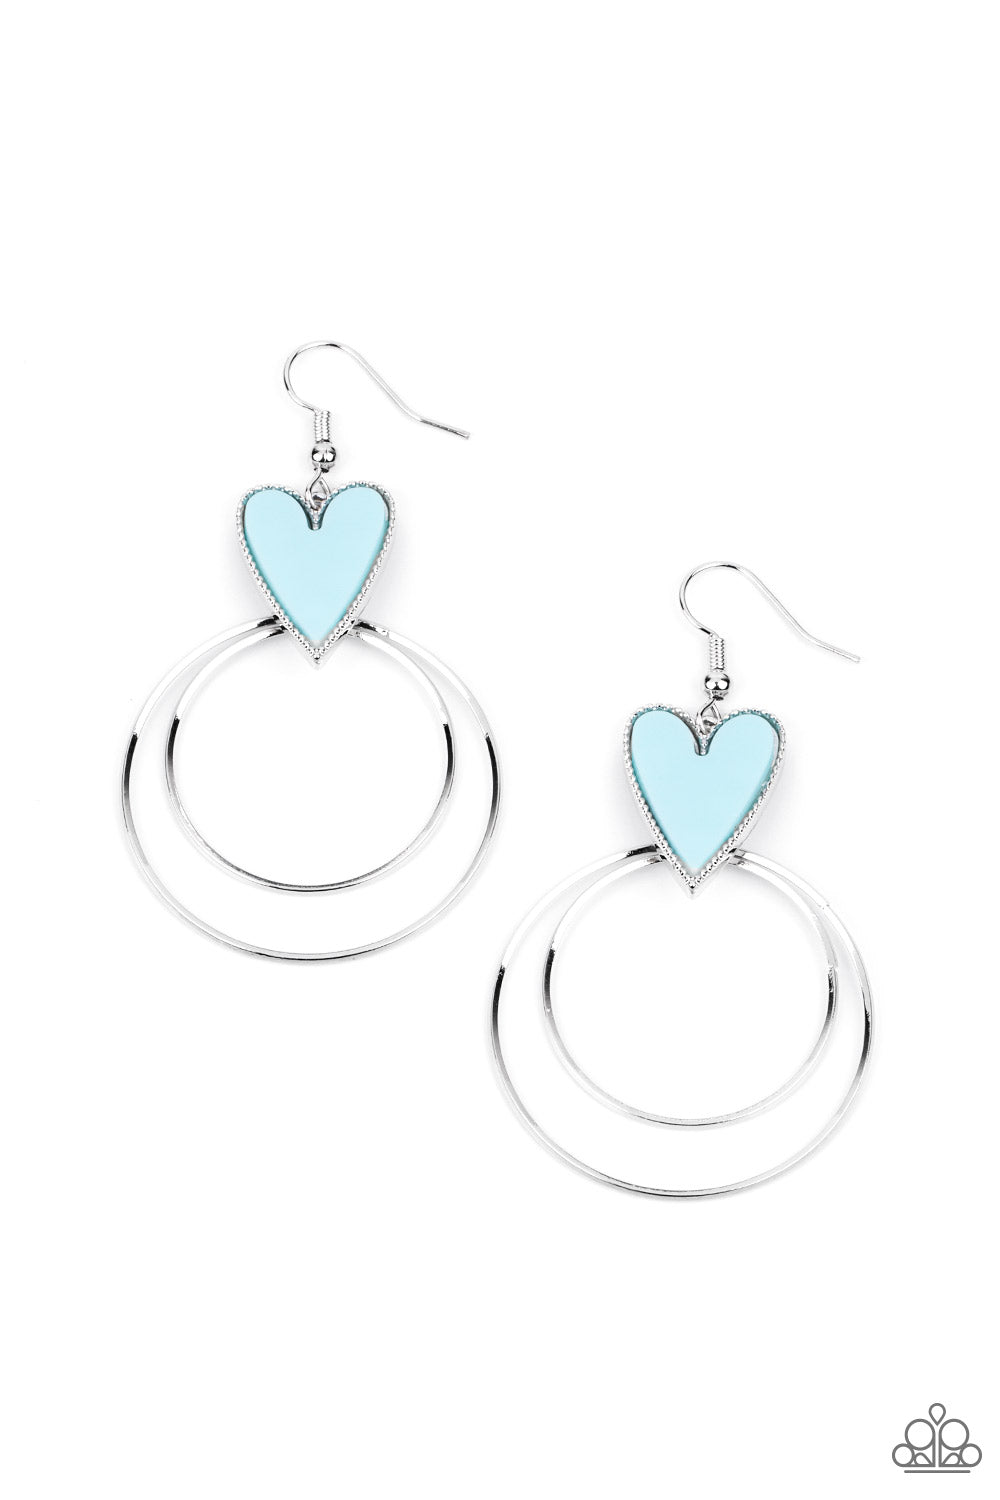 Paparazzi Accessories Happily Ever Hearts - Blue Earrings - Lady T Accessories